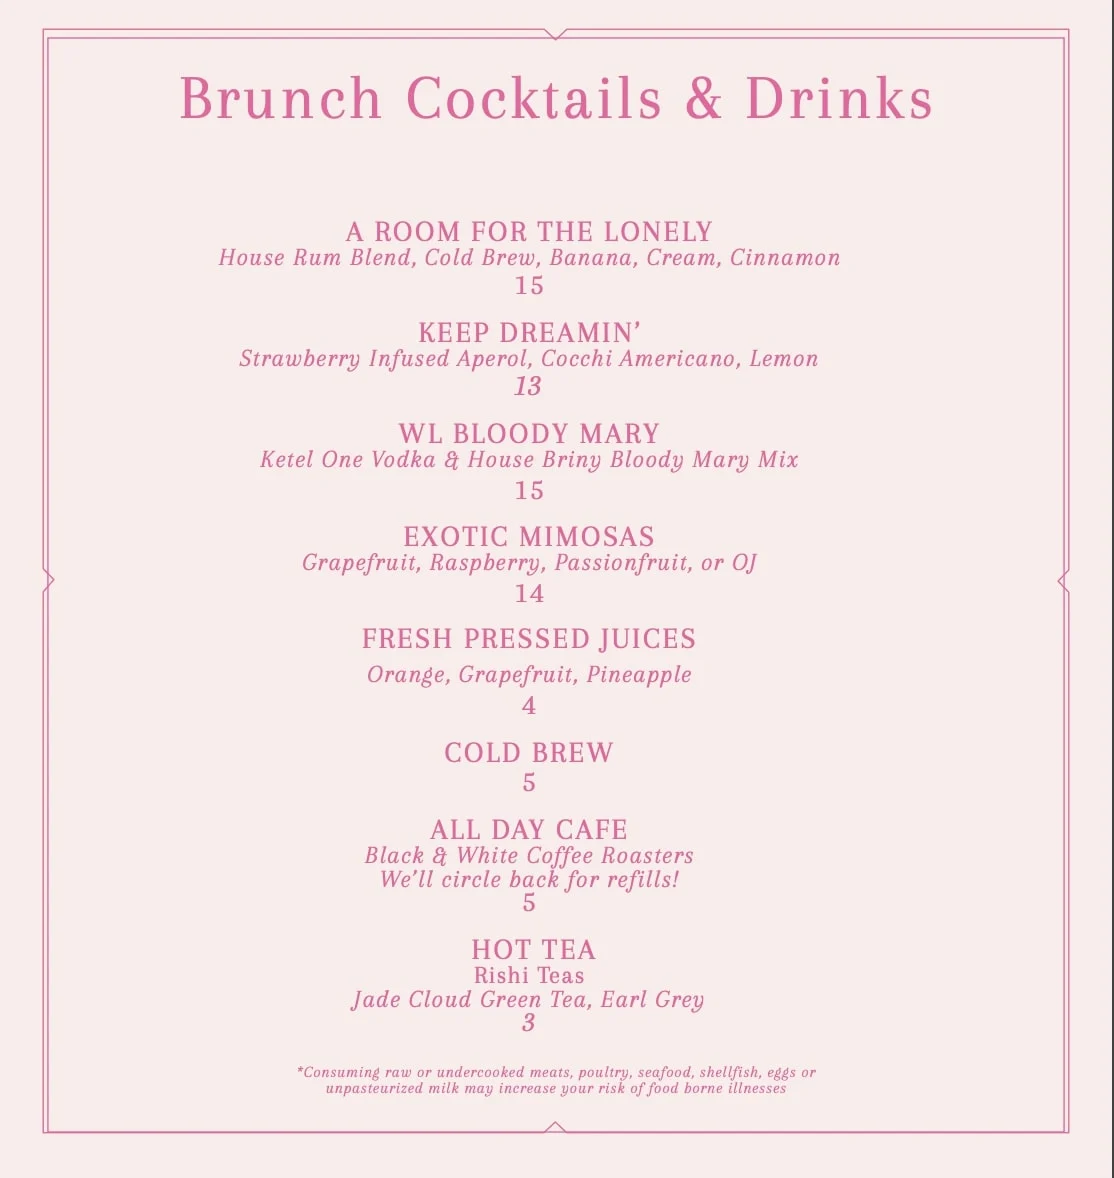 white limozeen brunch menu with brunch drinks such as mimosas and bloody marys for brunch in nashville tn 